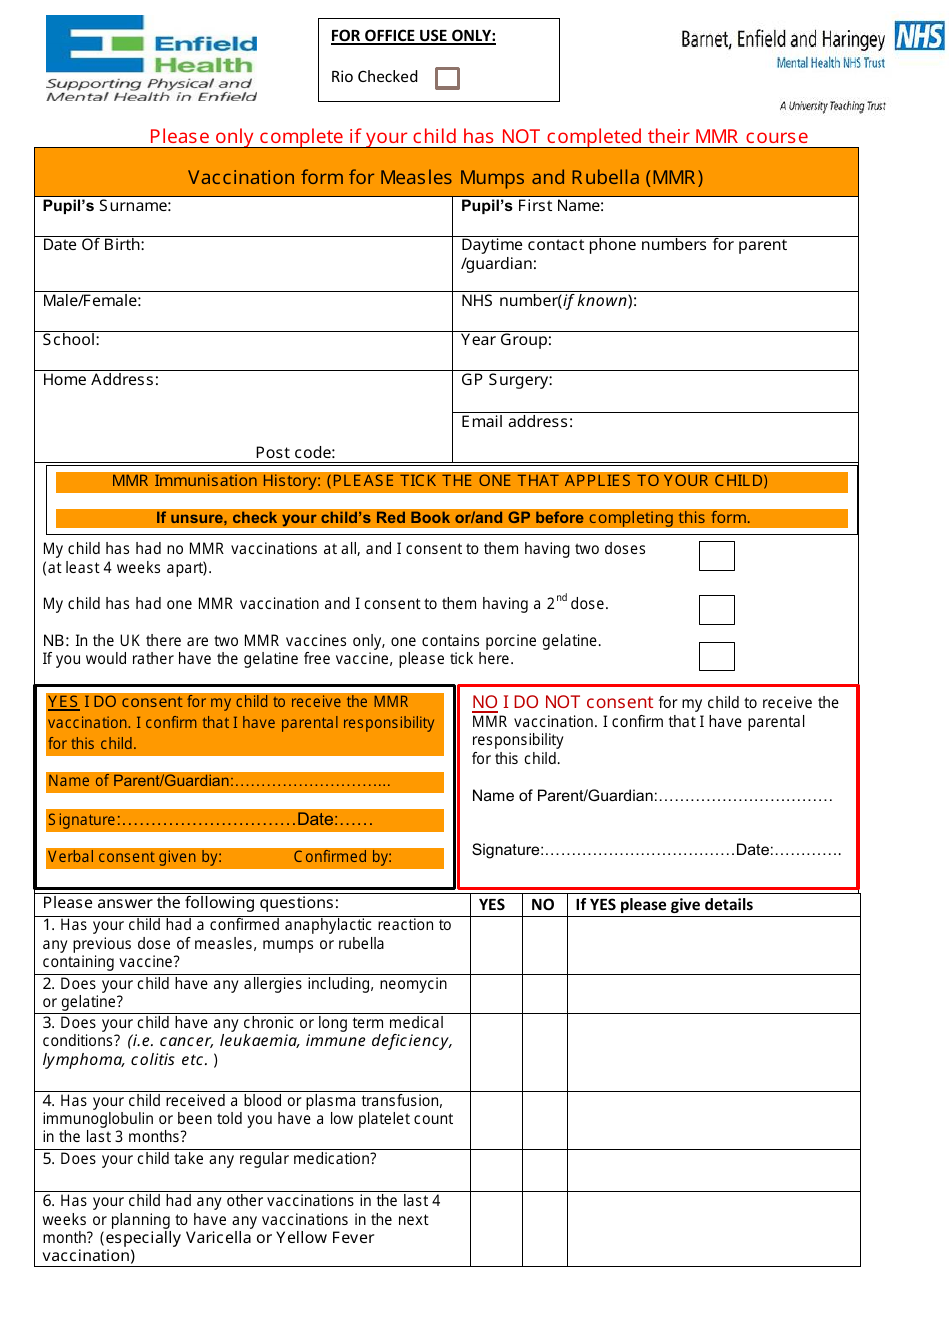 Vaccination Form for Measles Mumps and Rubella (Mmr) - United Kingdom, Page 1